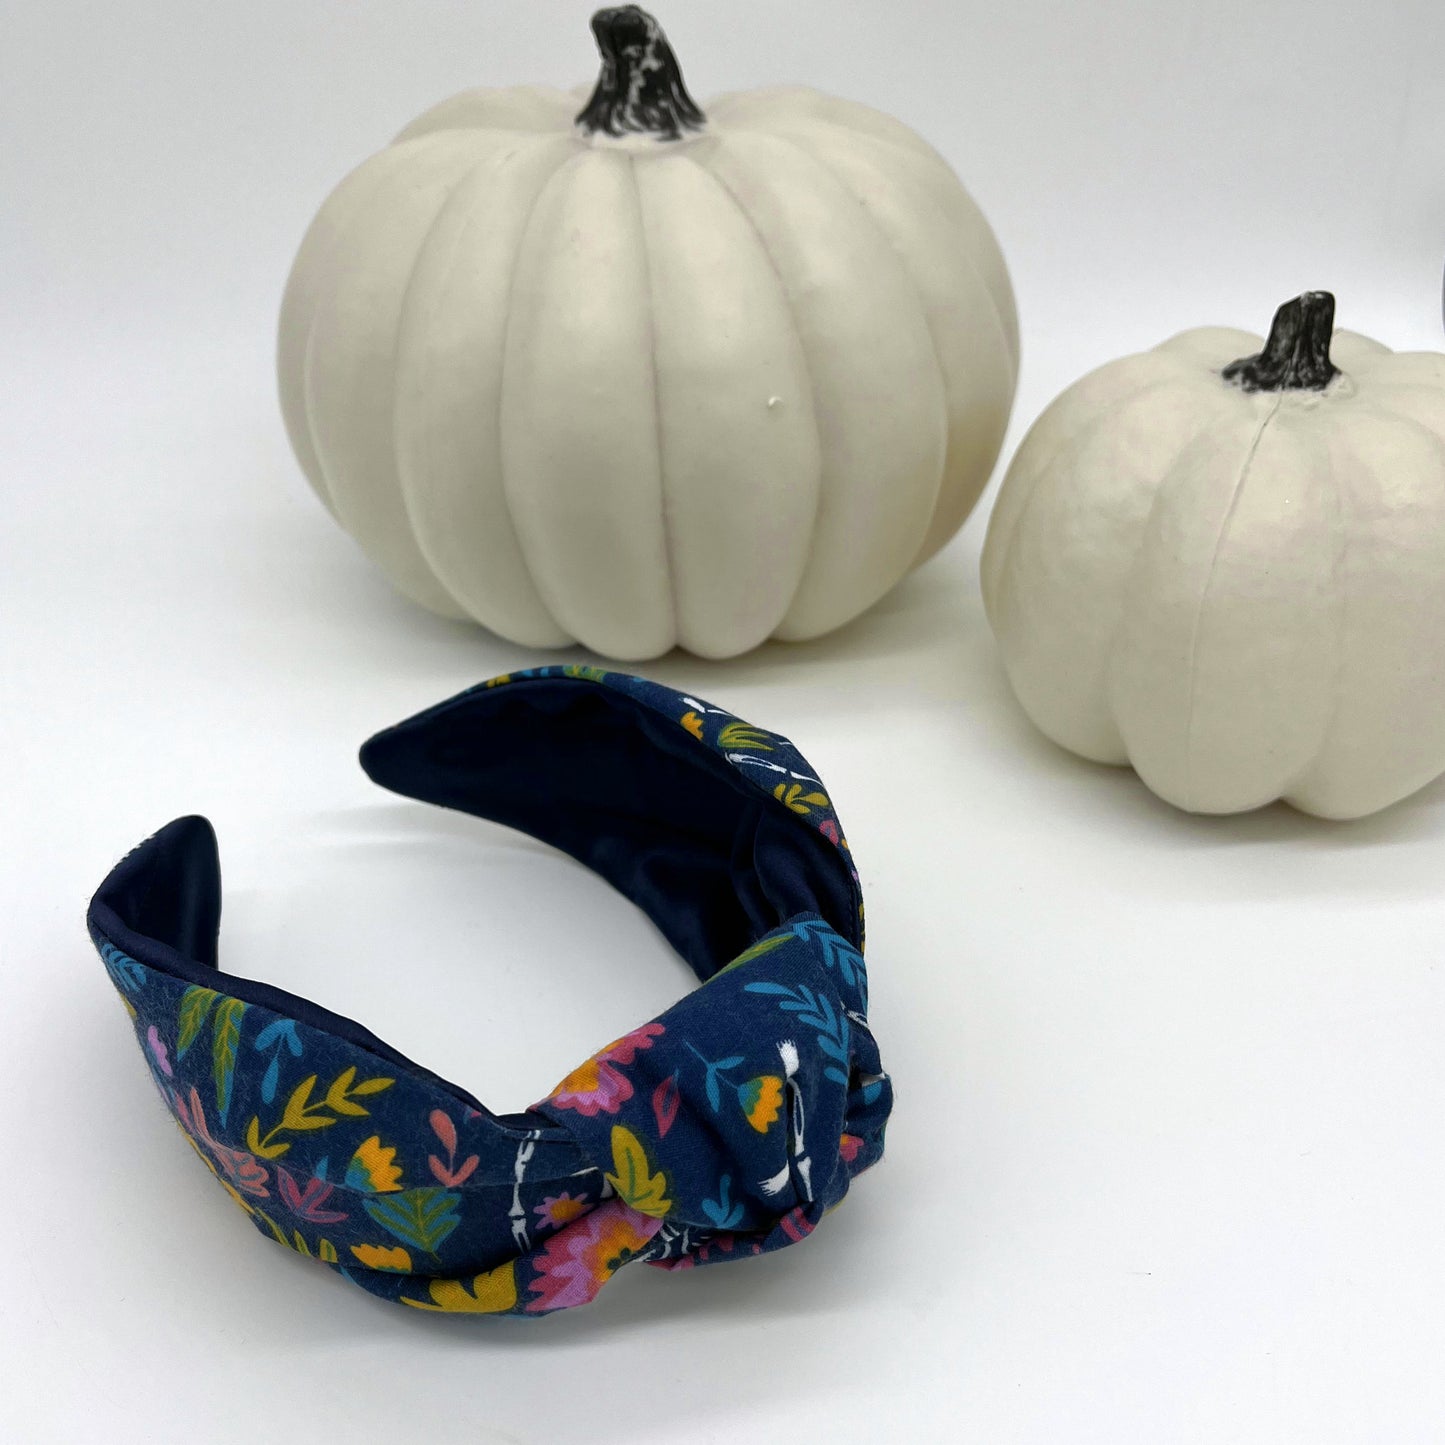 Floral Skeleton Classic Knot Headband in Blue